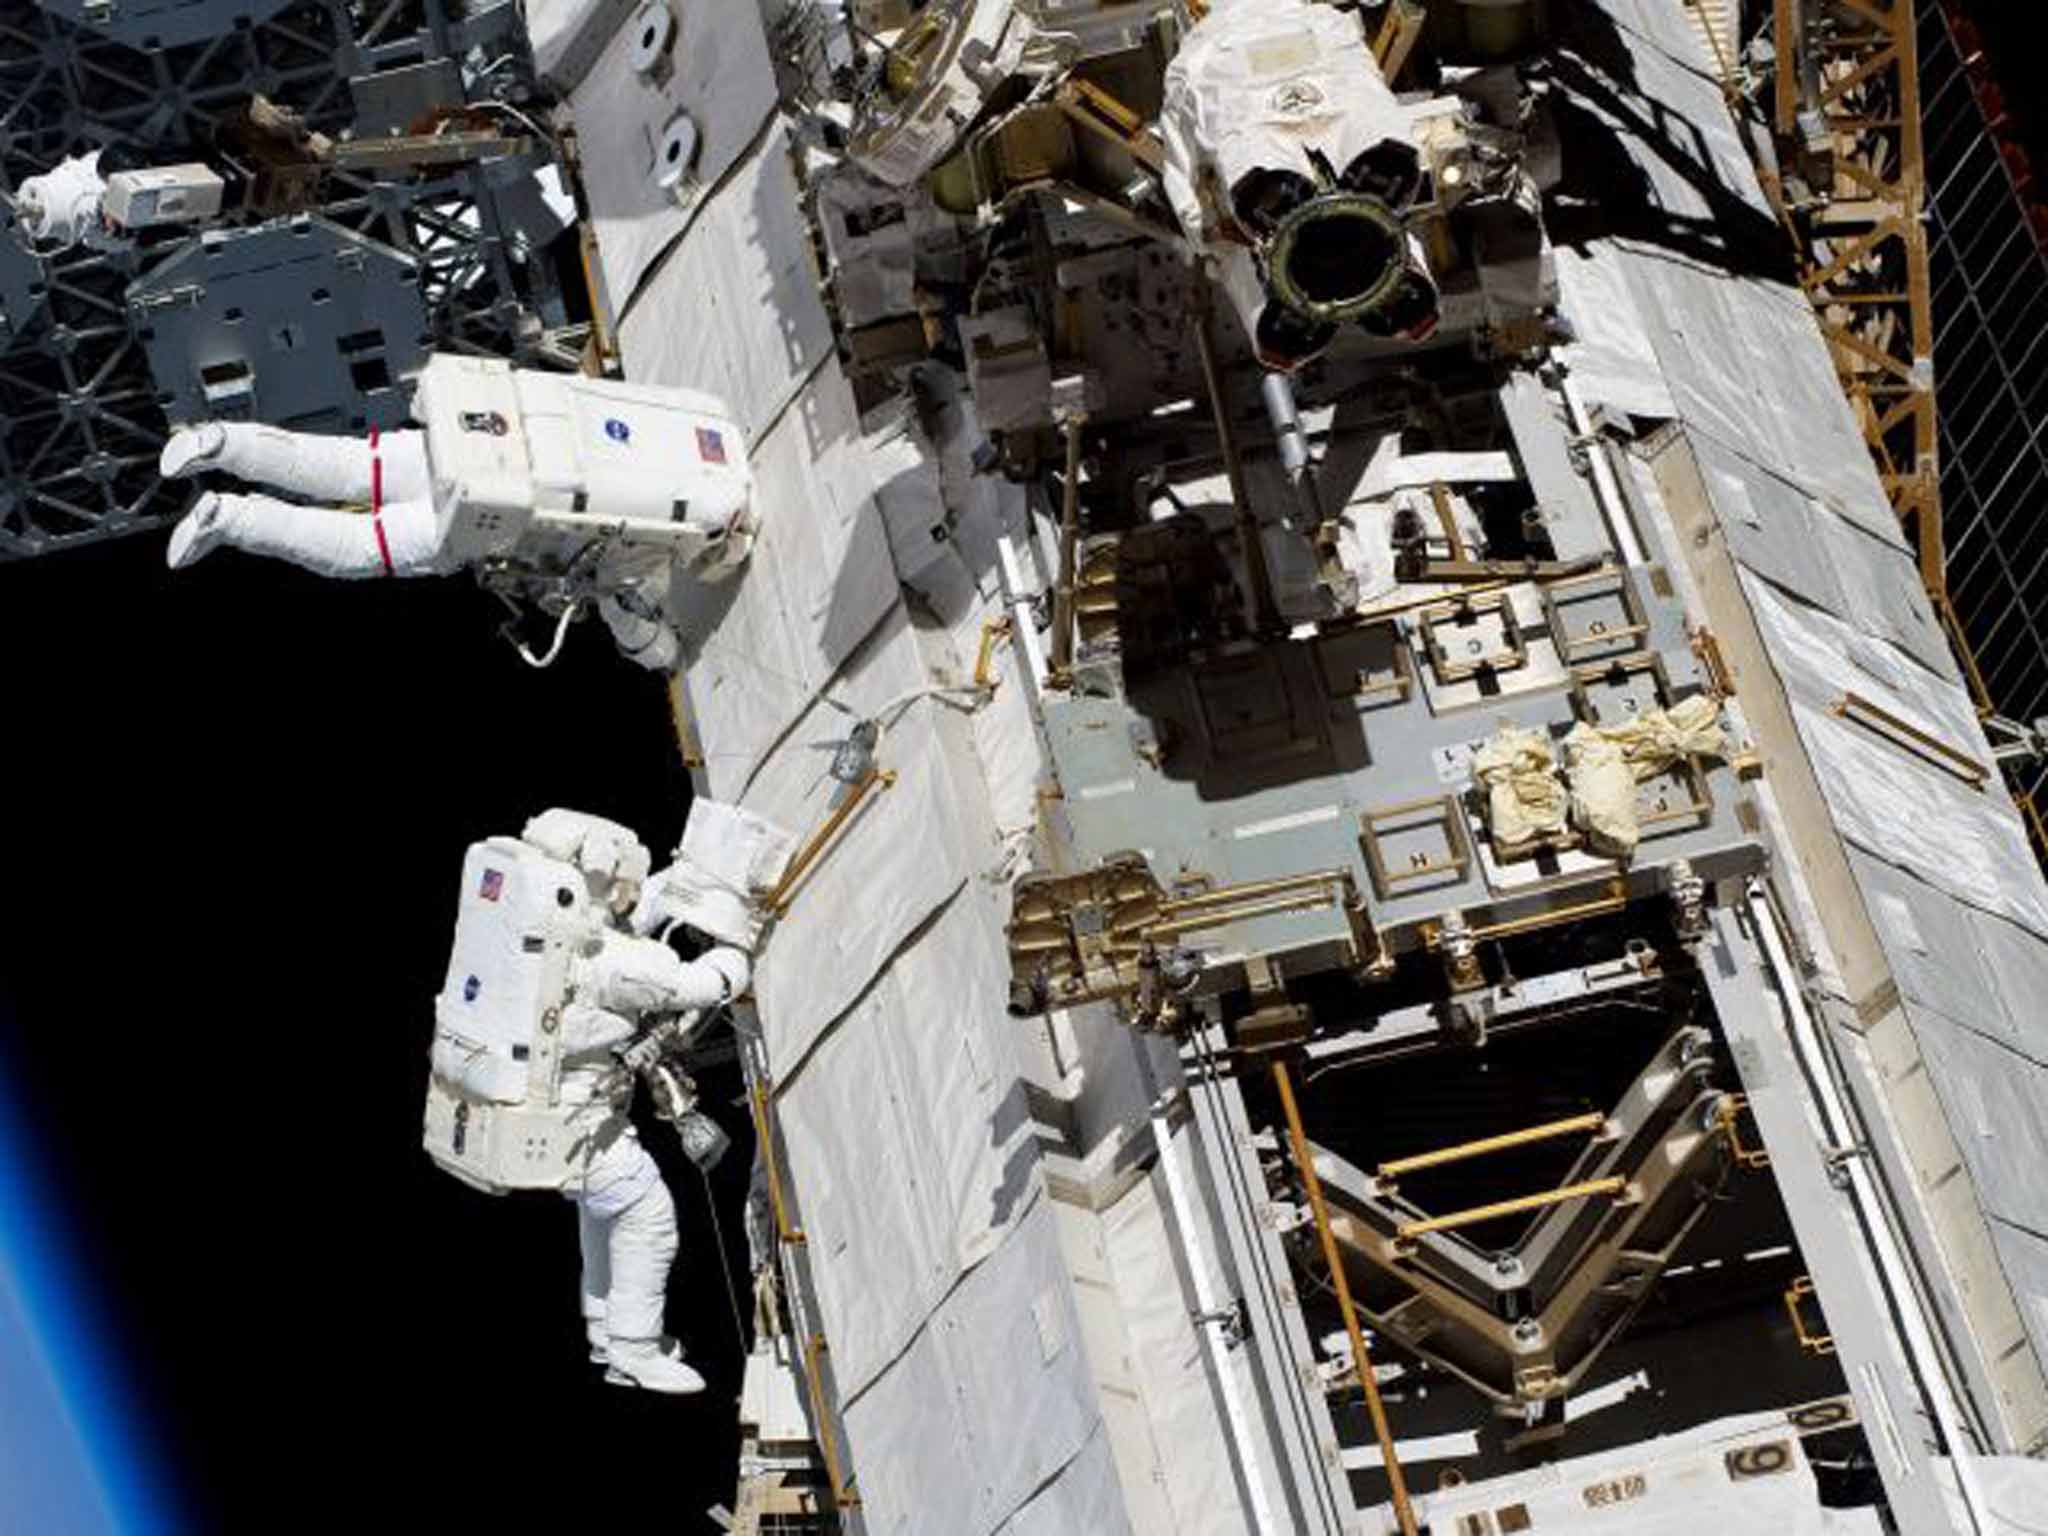 Toilet Leak On International Space Station Causes 10 Litres